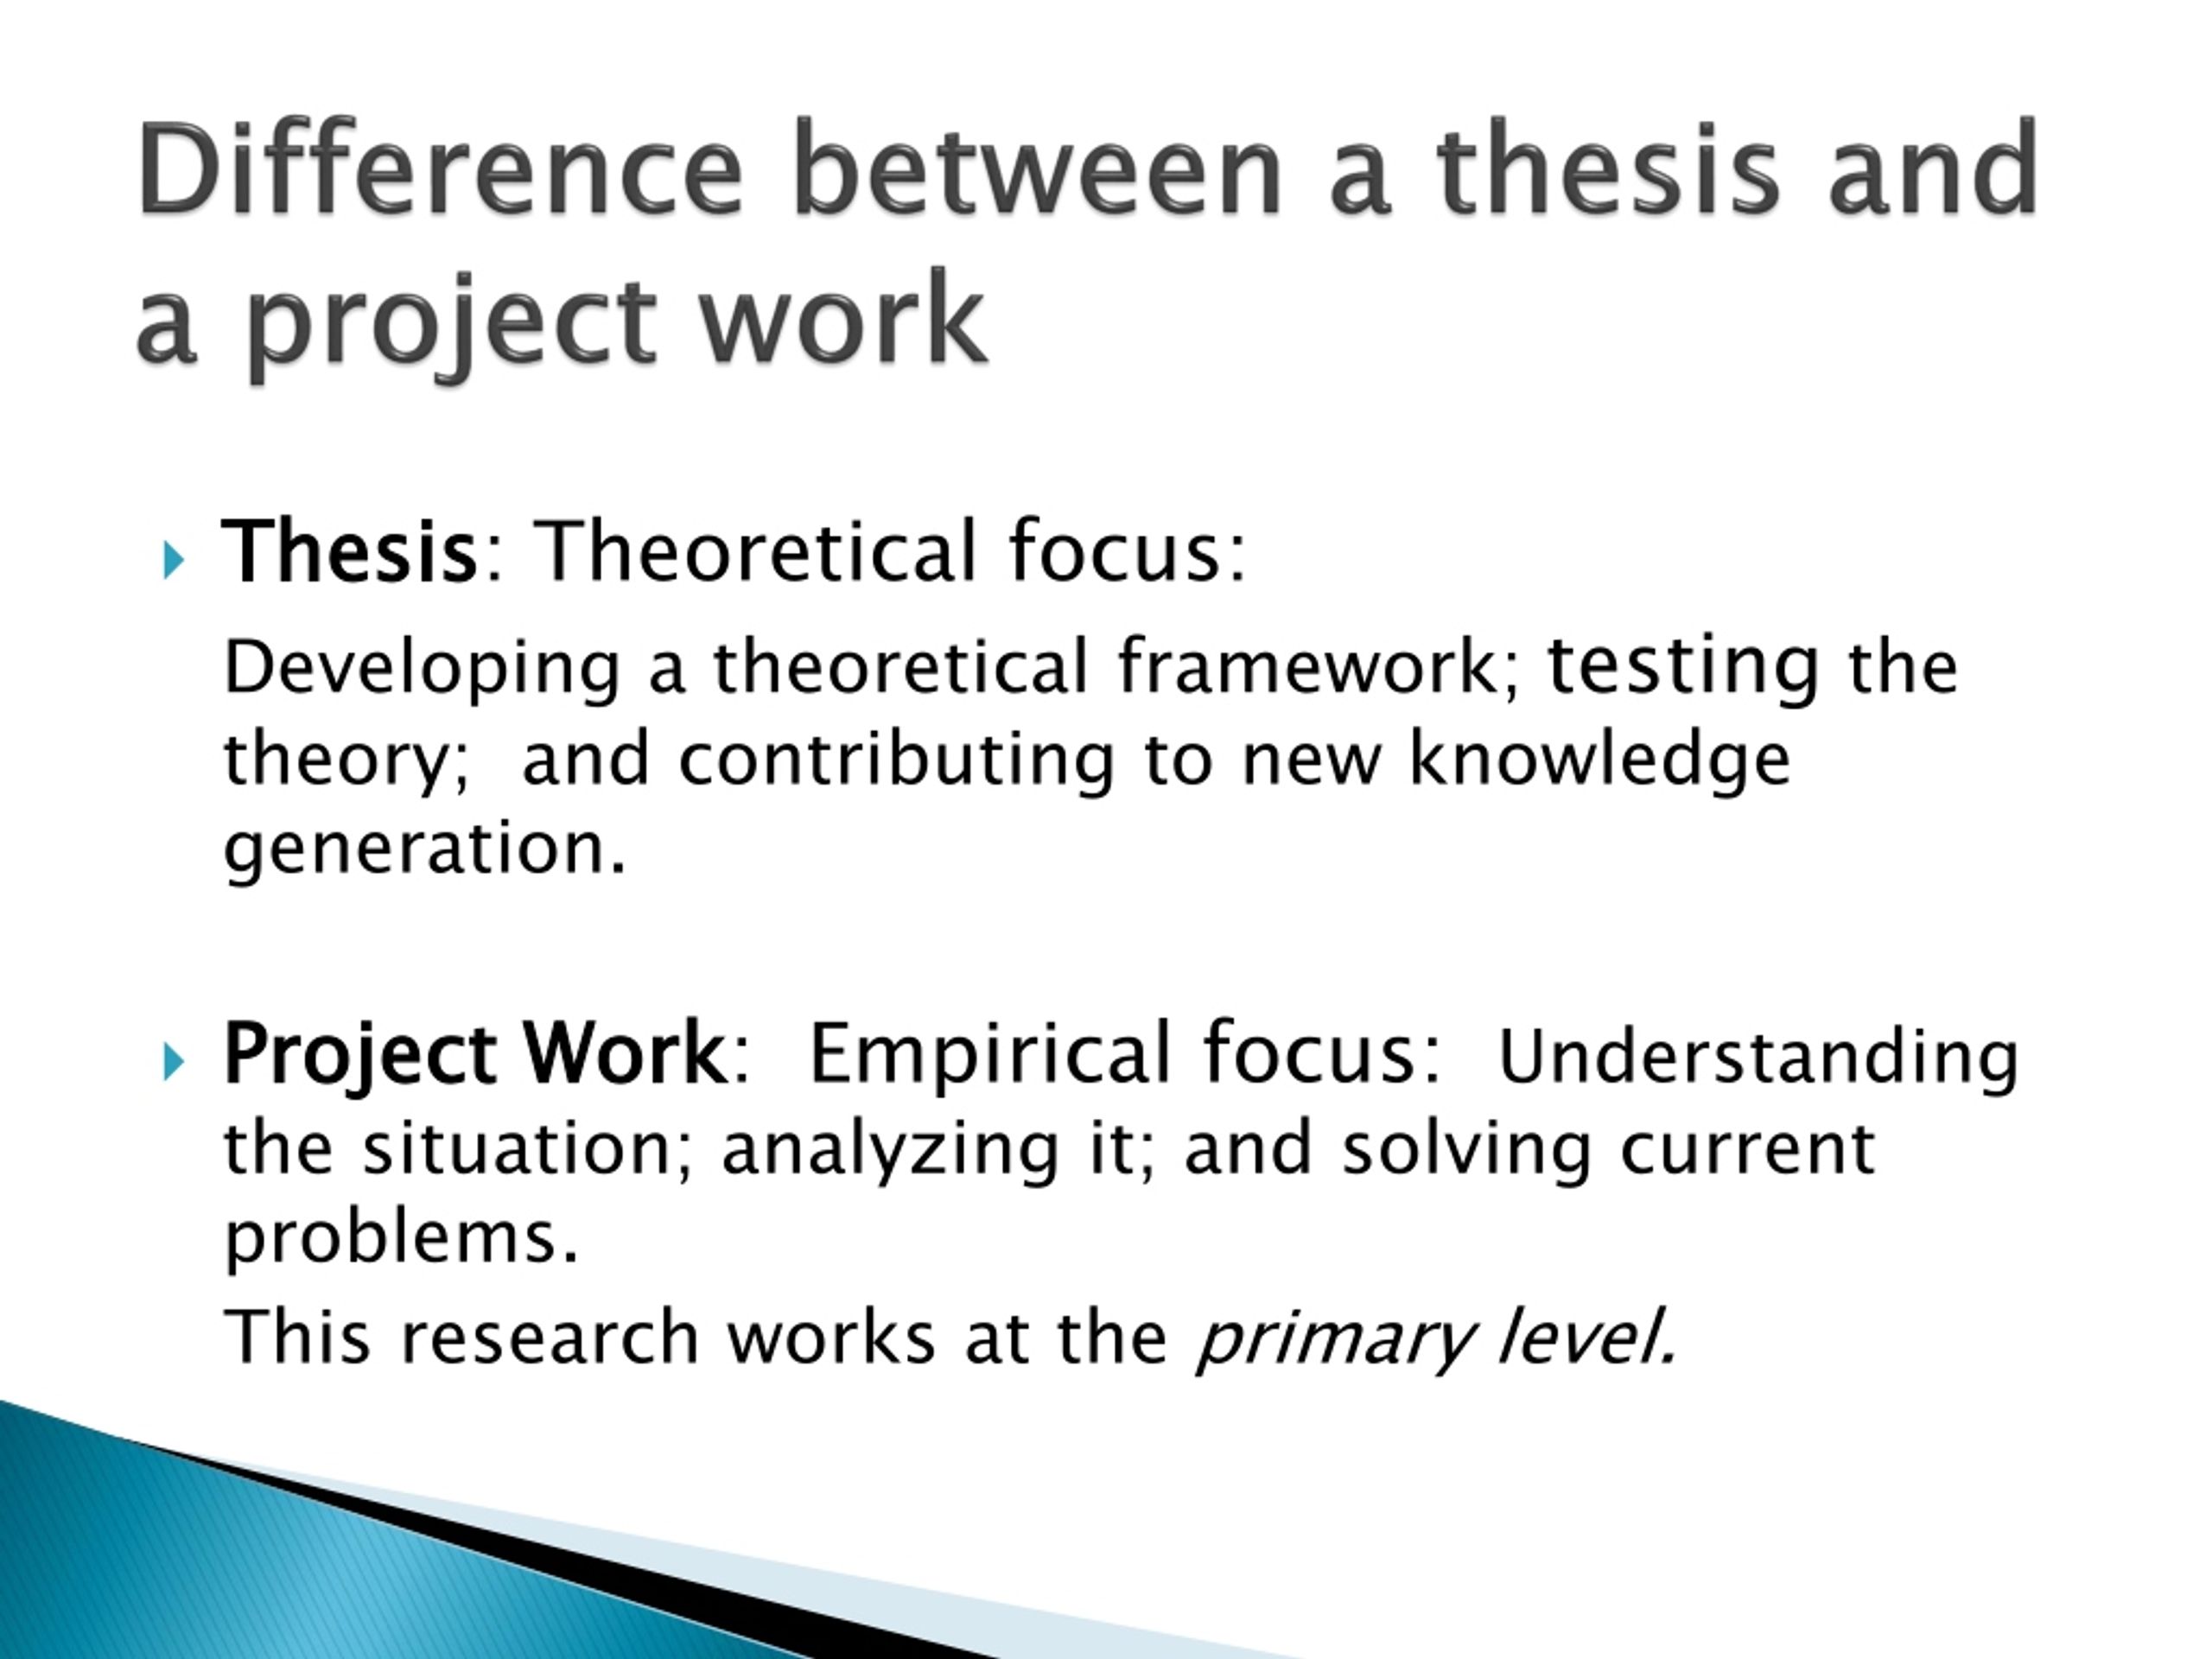 what is the difference between thesis and project work